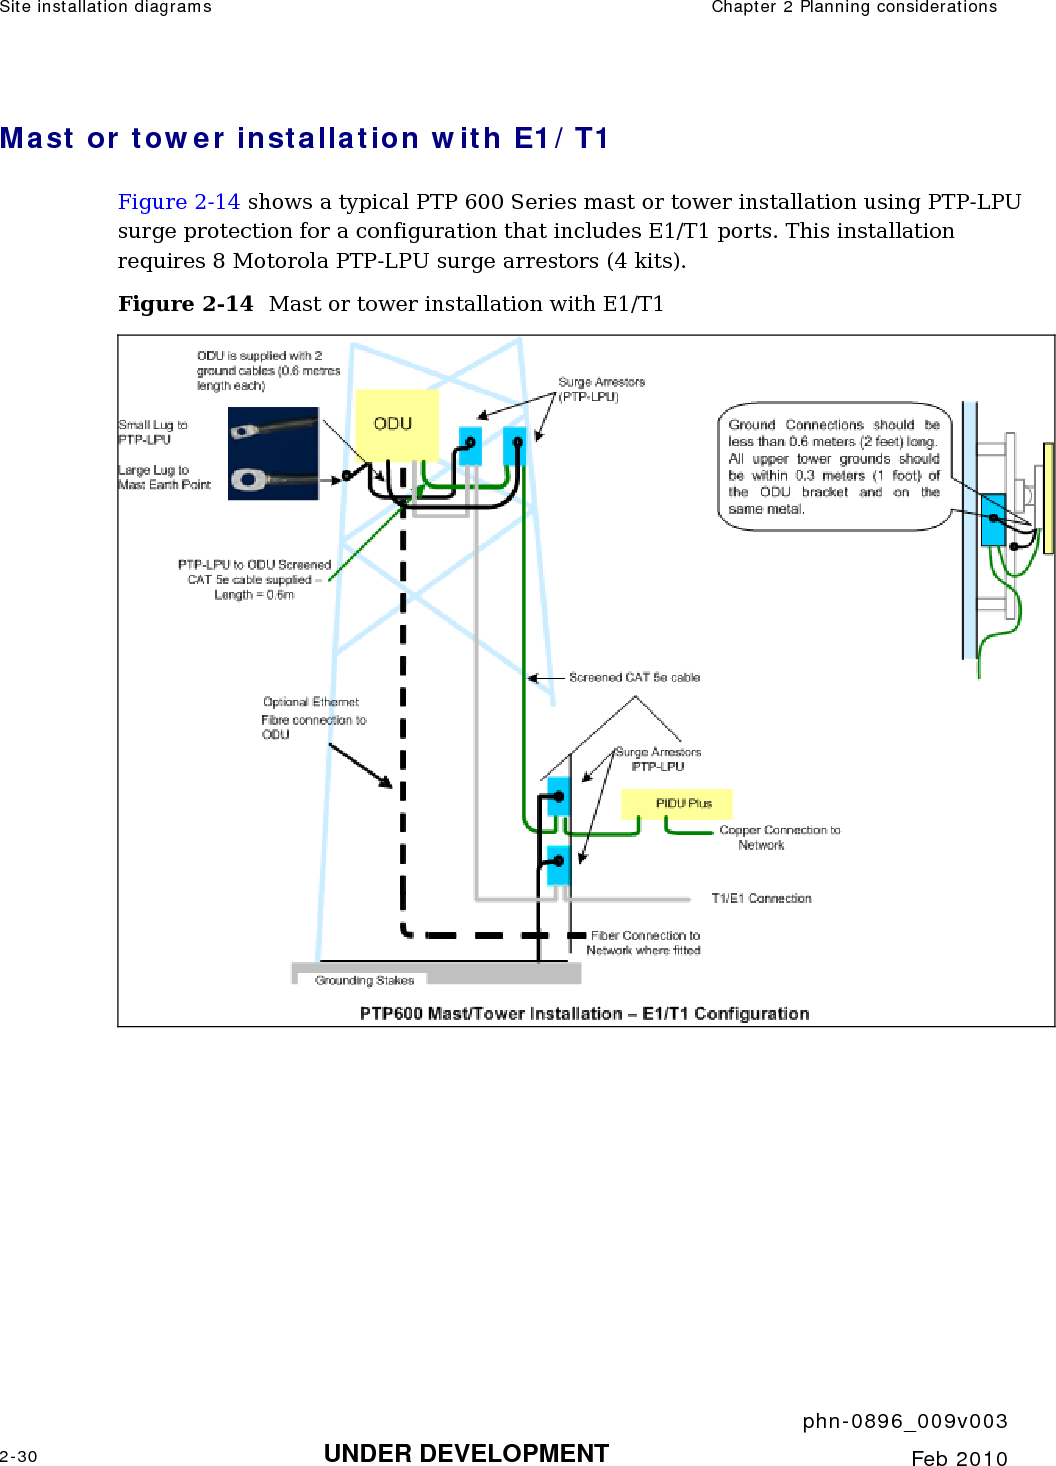 Site installation diagrams  Chapter 2 Planning considerations     phn-0896_009v003 2-30 UNDER DEVELOPMENT  Feb 2010  Mast or tower installation with E1/T1 Figure 2-14 shows a typical PTP 600 Series mast or tower installation using PTP-LPU surge protection for a configuration that includes E1/T1 ports. This installation requires 8 Motorola PTP-LPU surge arrestors (4 kits). Figure 2-14  Mast or tower installation with E1/T1    